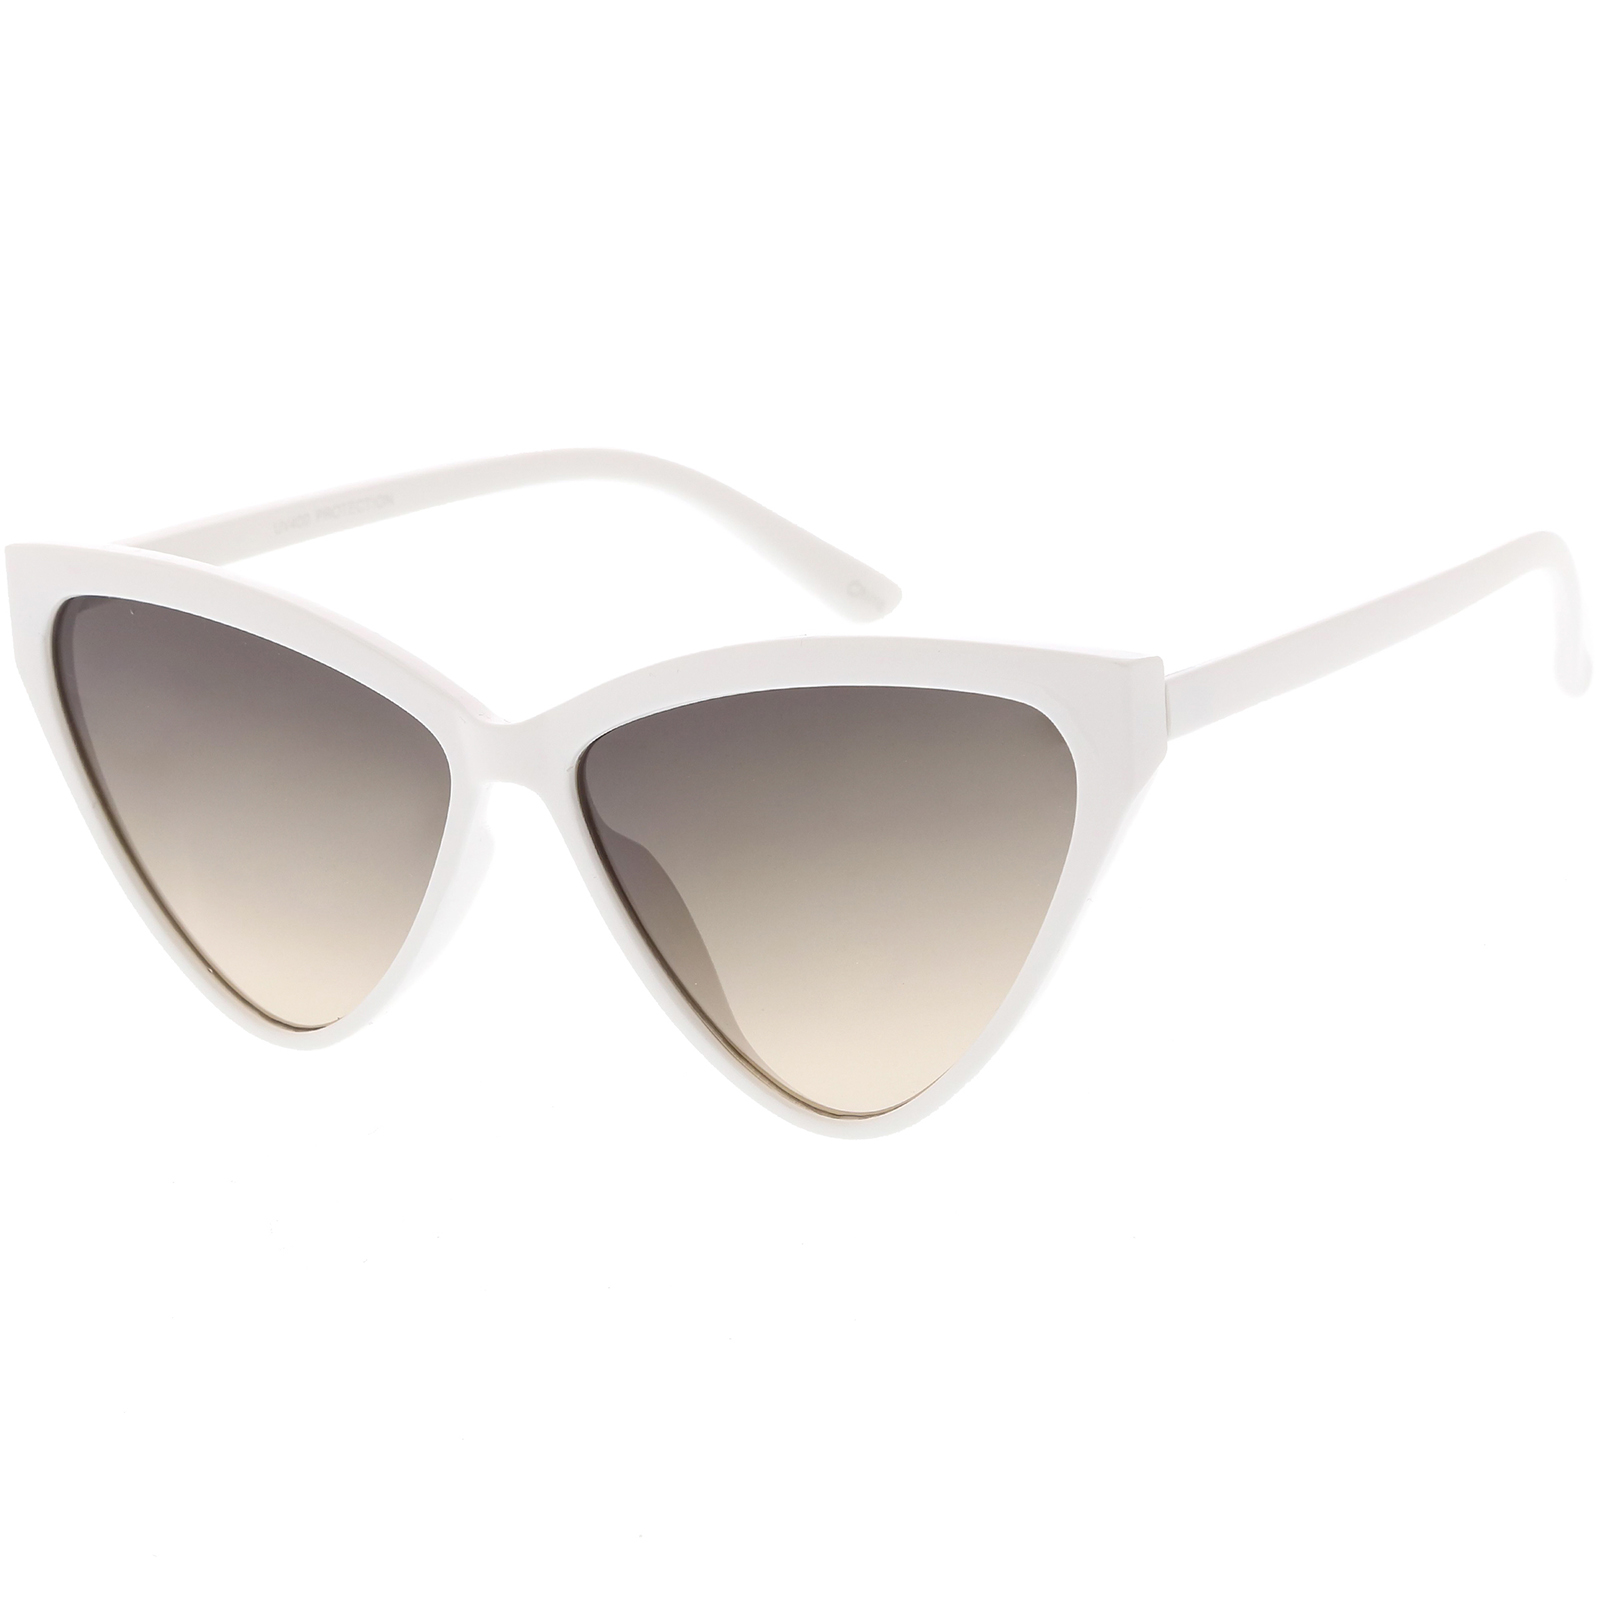 Oversize Vintage Cat Eye Sunglasses Color Tinted Lens 59mm (White / Smoke Gradient) - image 2 of 4